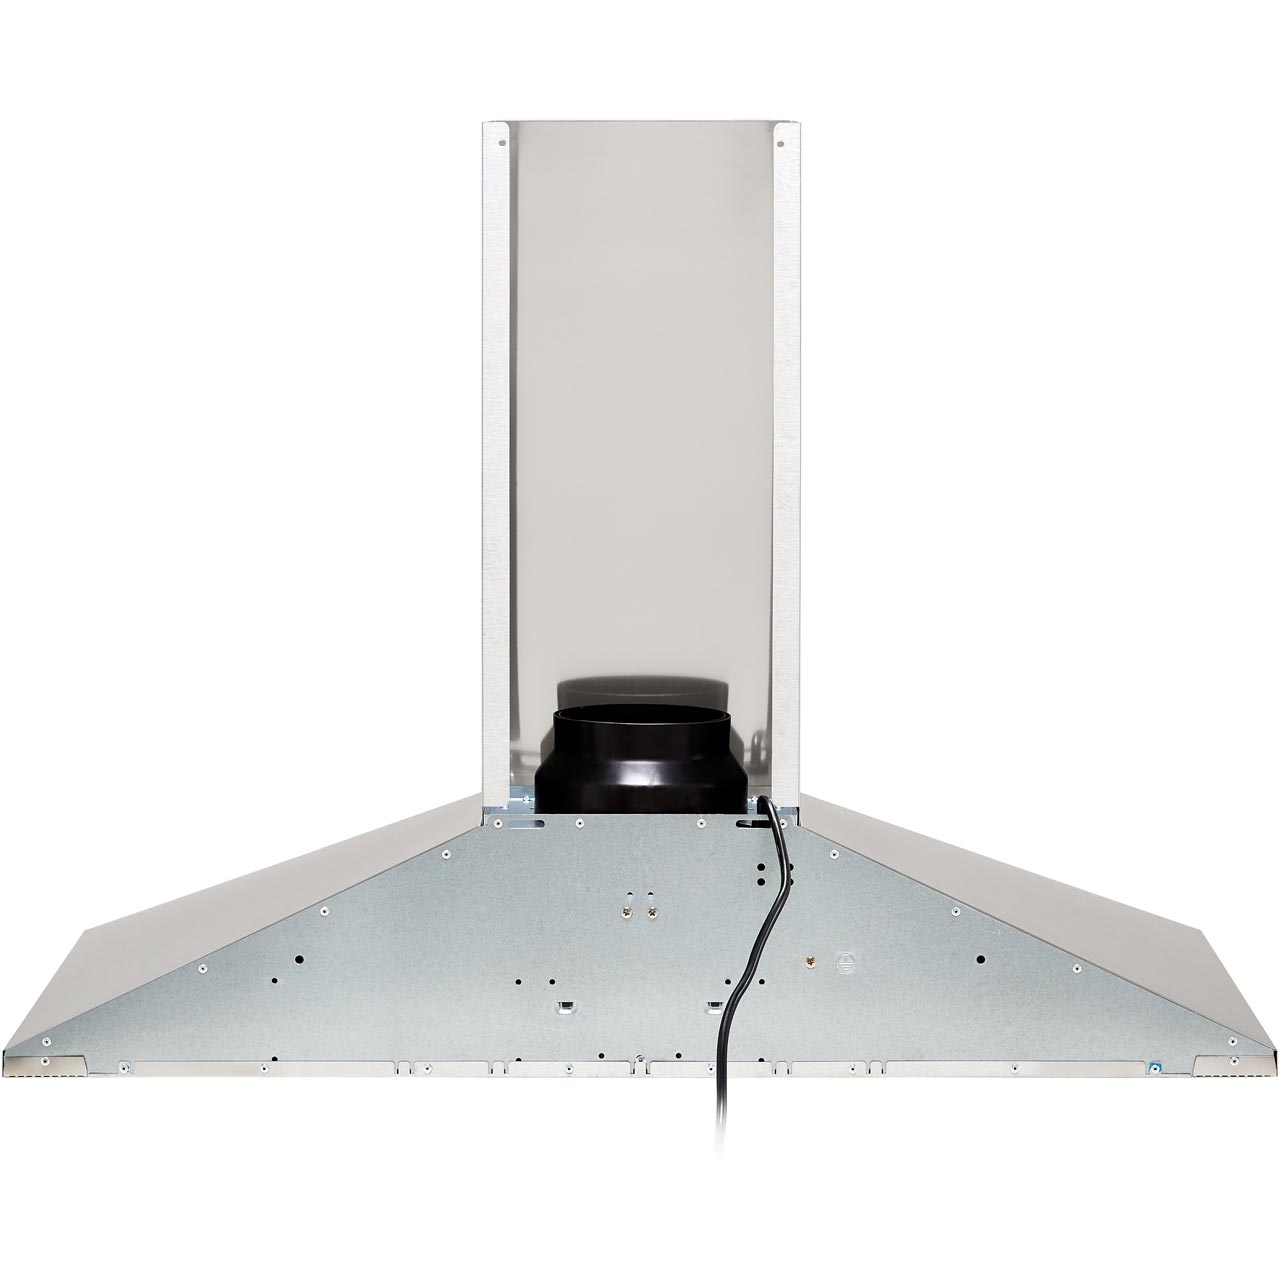 Candy CCE119/1X 90 cm Chimney Cooker Hood Stainless Steel